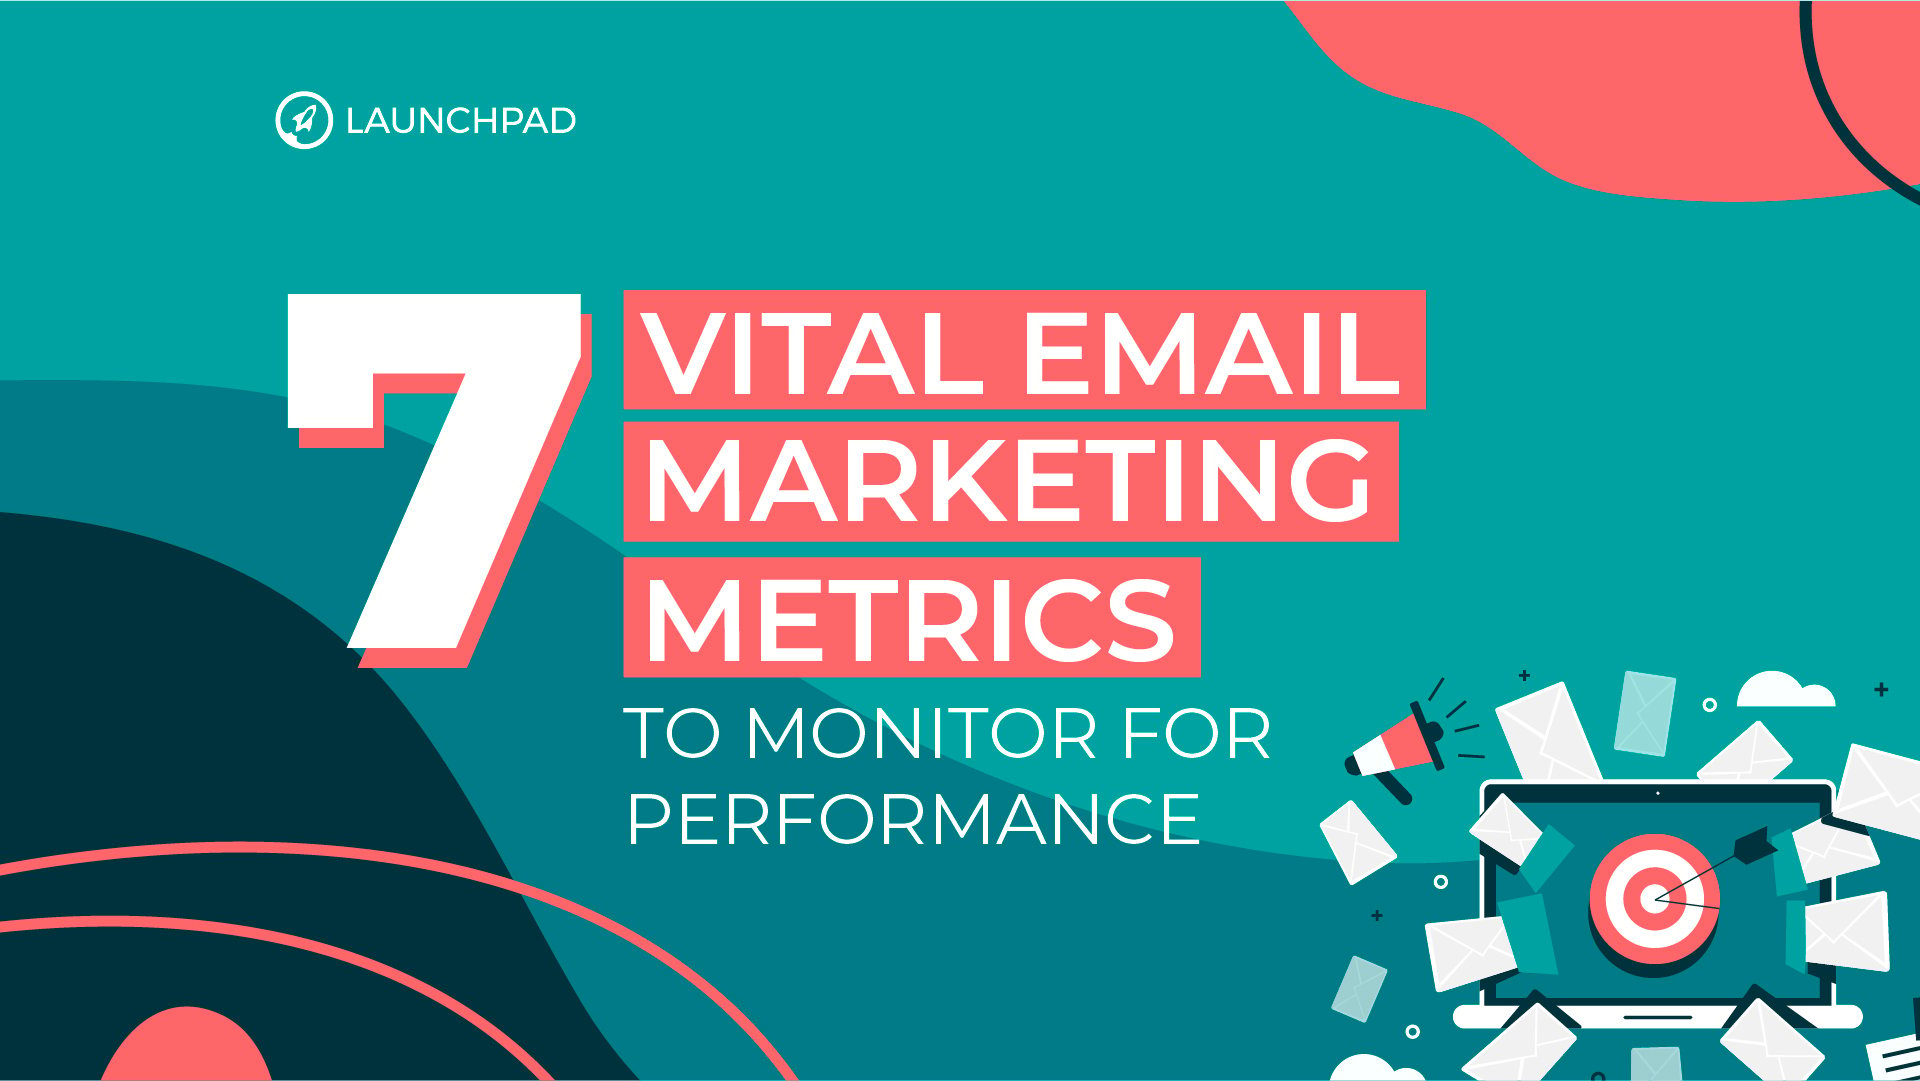 Vital Email Marketing Metrics to Monitor for Performance-Launchpad